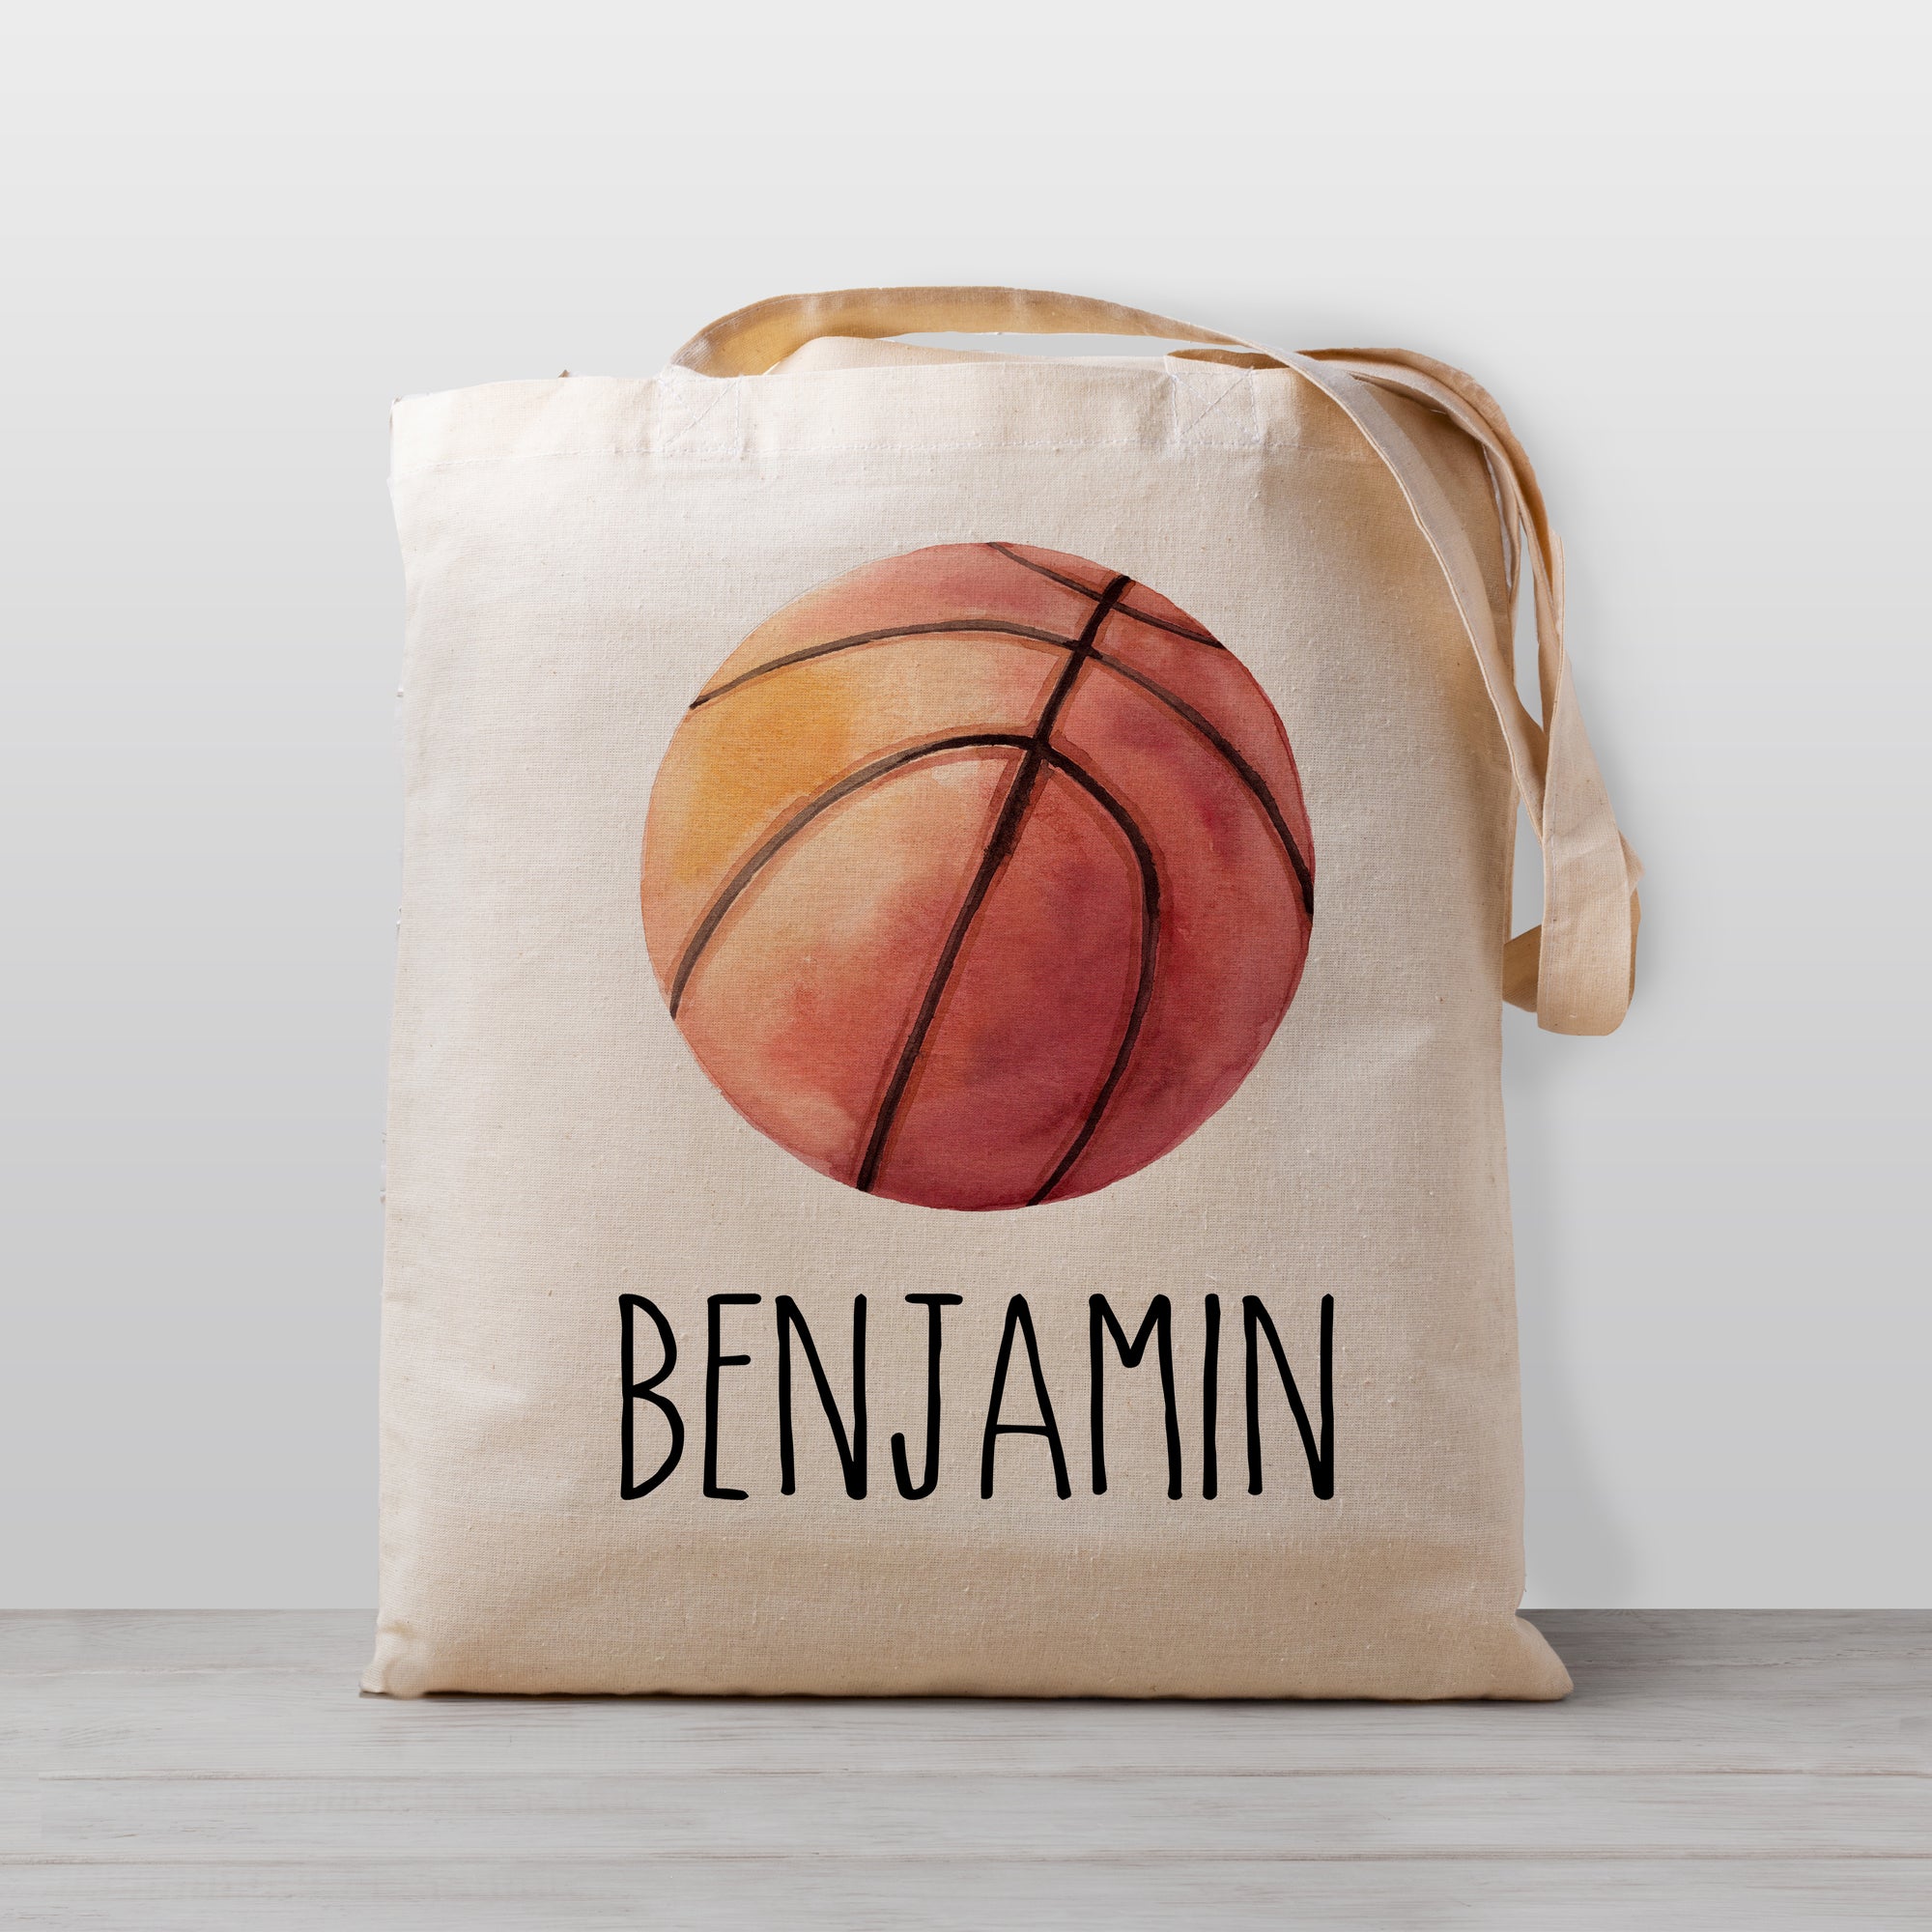 A cute basketball tote bag, Personalized with your child's name. Perfect for carrying your little one's stuff to preschool, daycare, the library, or bringing favorite books over to Grandma's house. 